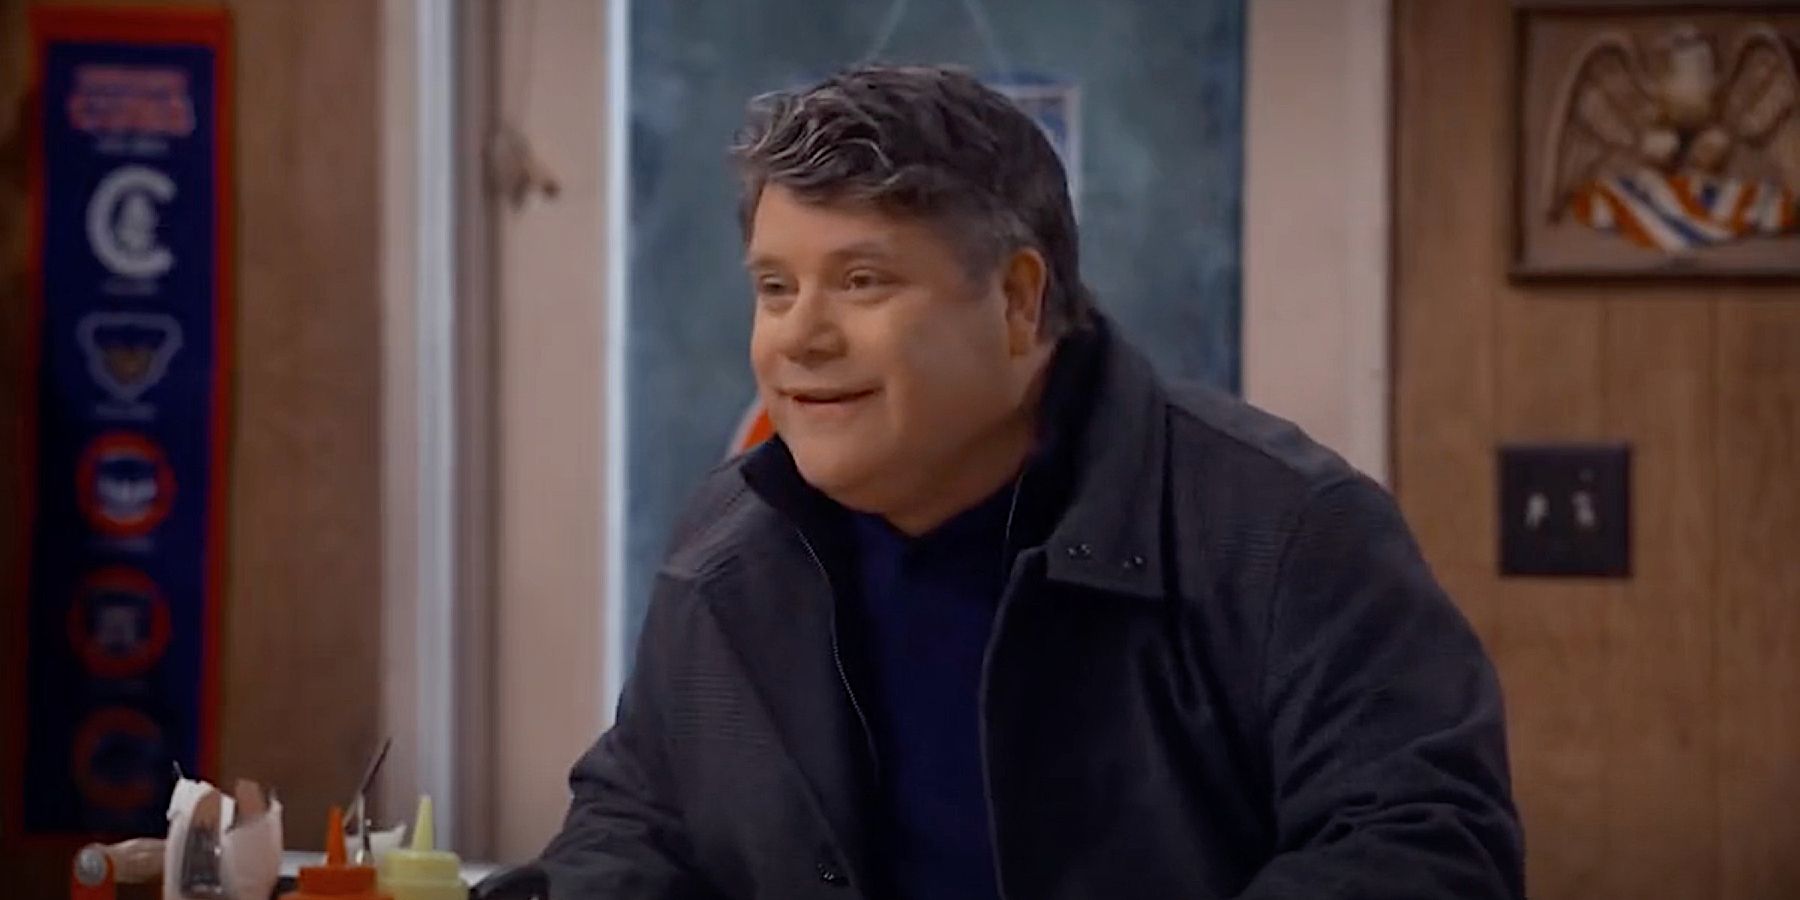 Sean Astin excitedly talking in The Conners season 5 episode 20